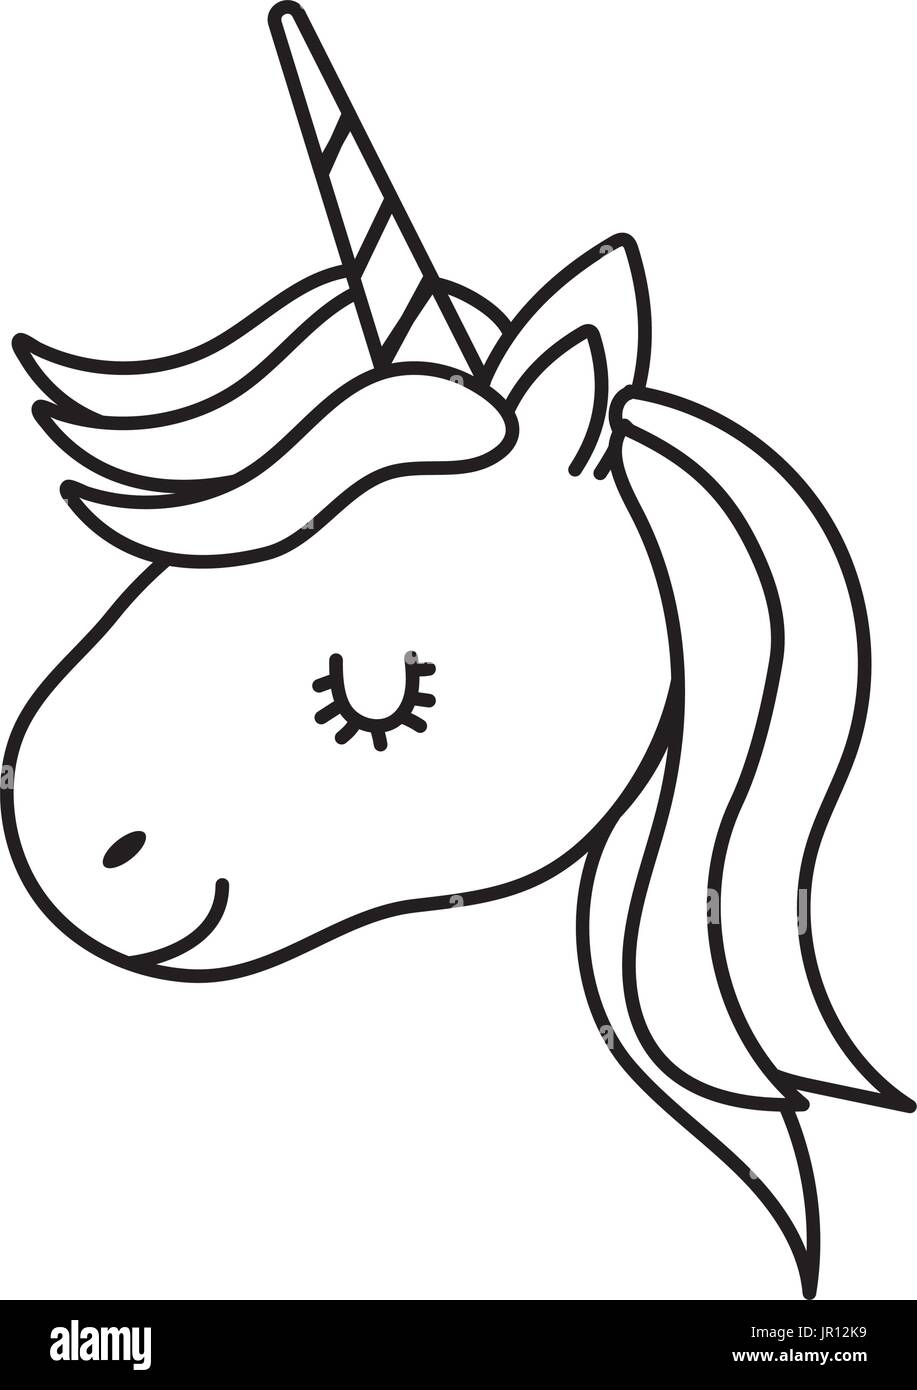 Easy Unicorn Drawing Black And White